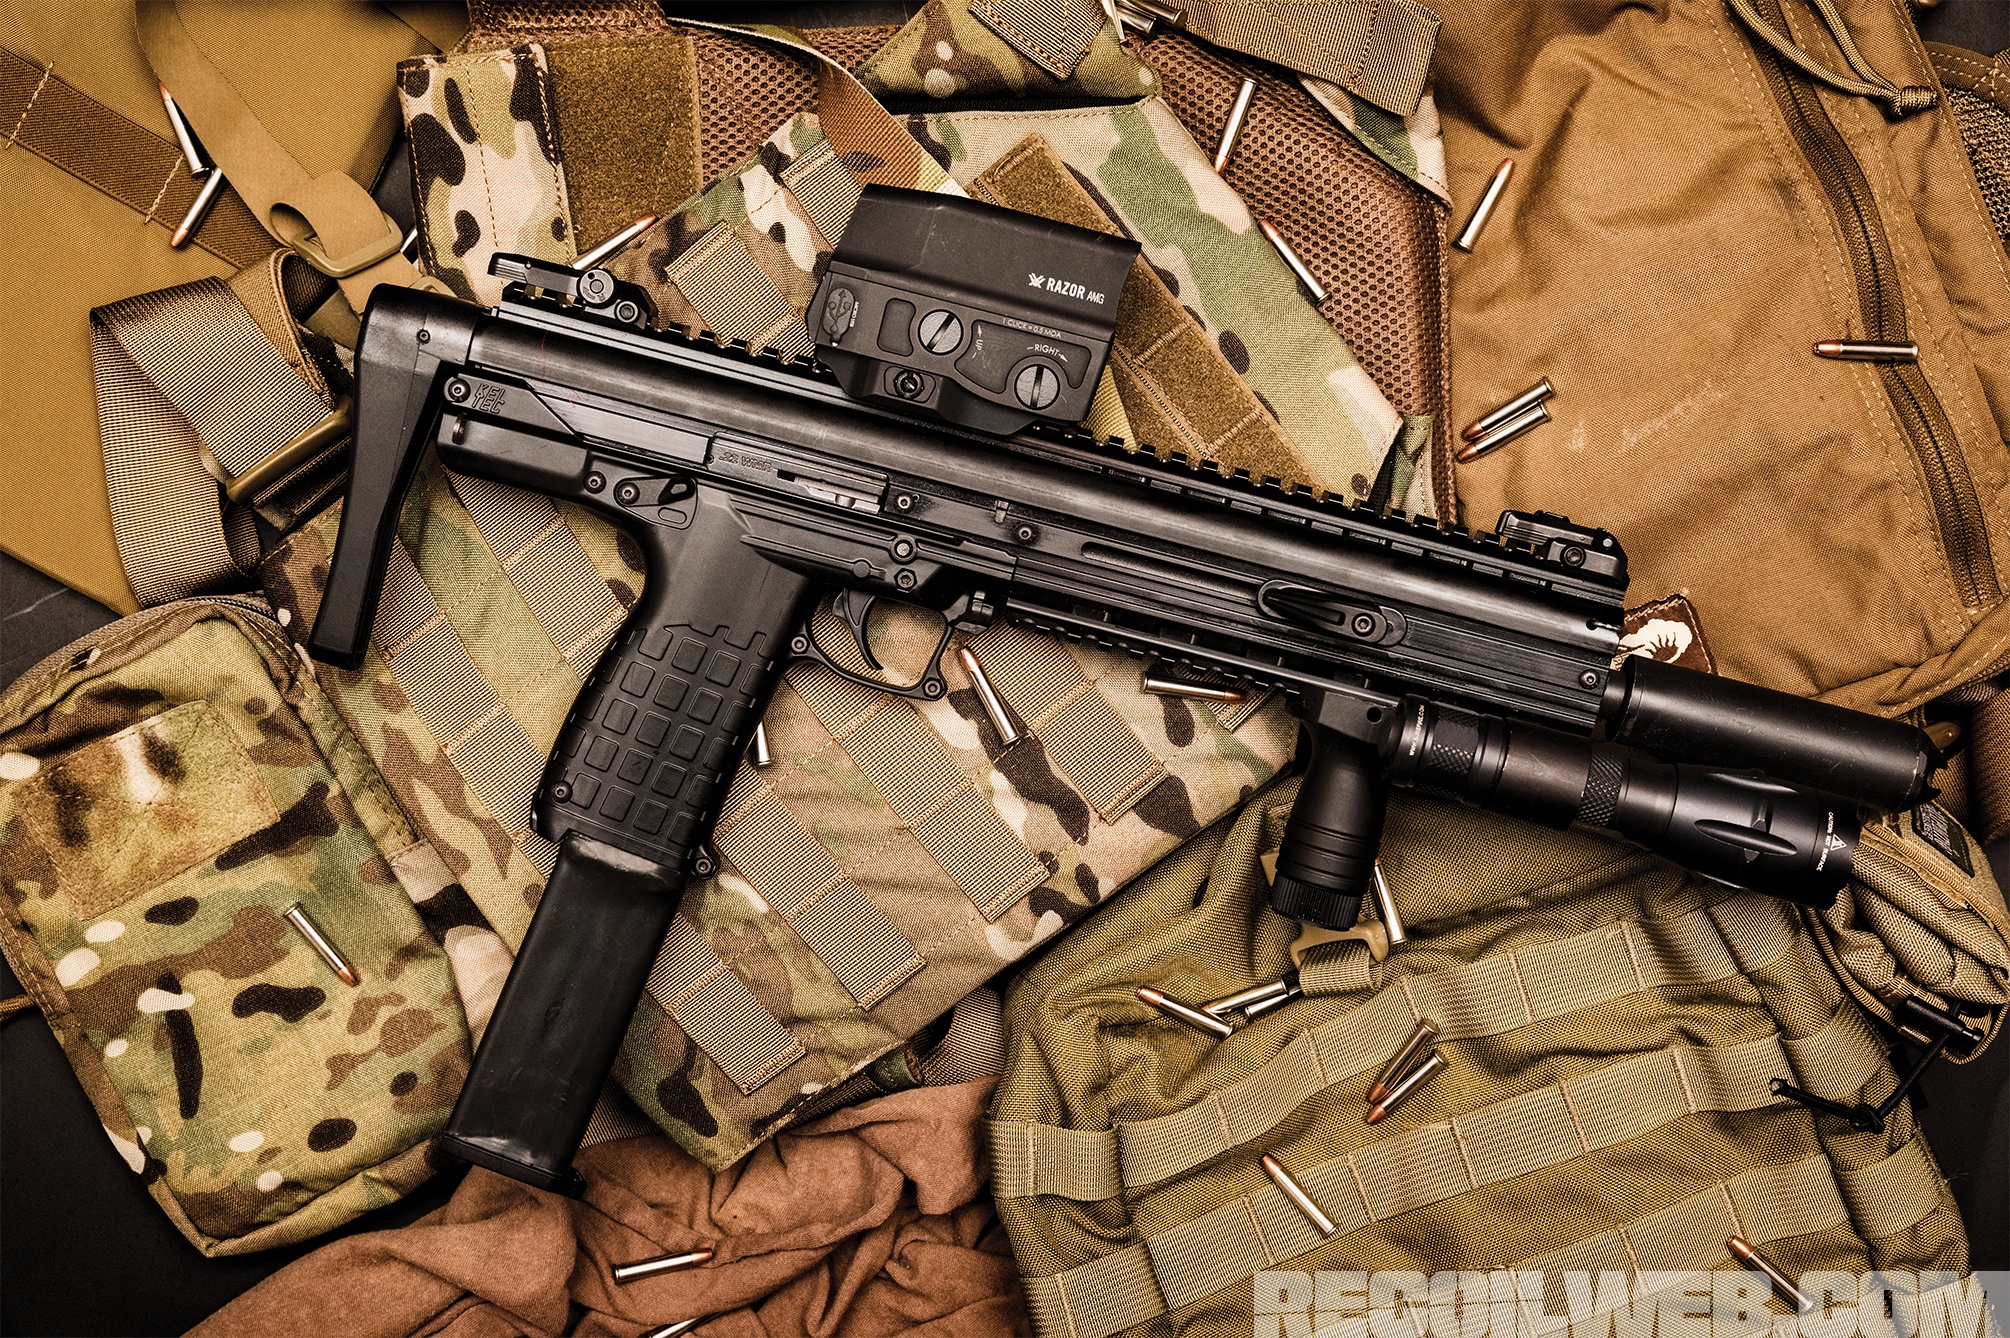 We Make a Poor Man’s MP7 with a KelTec CMR-30 RECOIL.